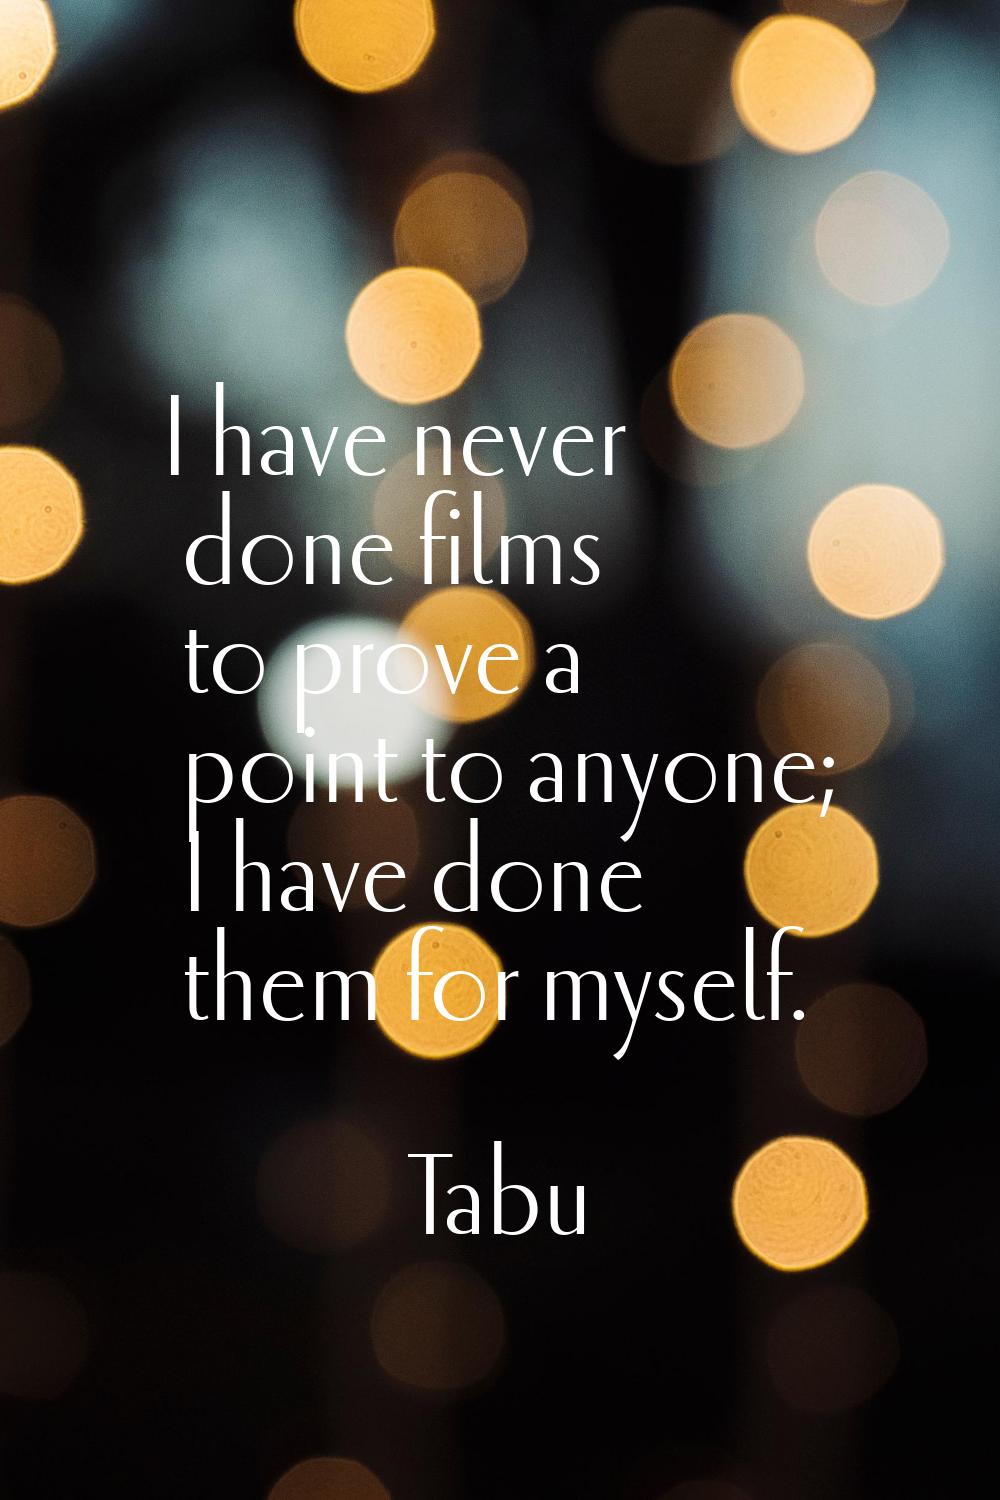 I have never done films to prove a point to anyone; I have done them for myself.